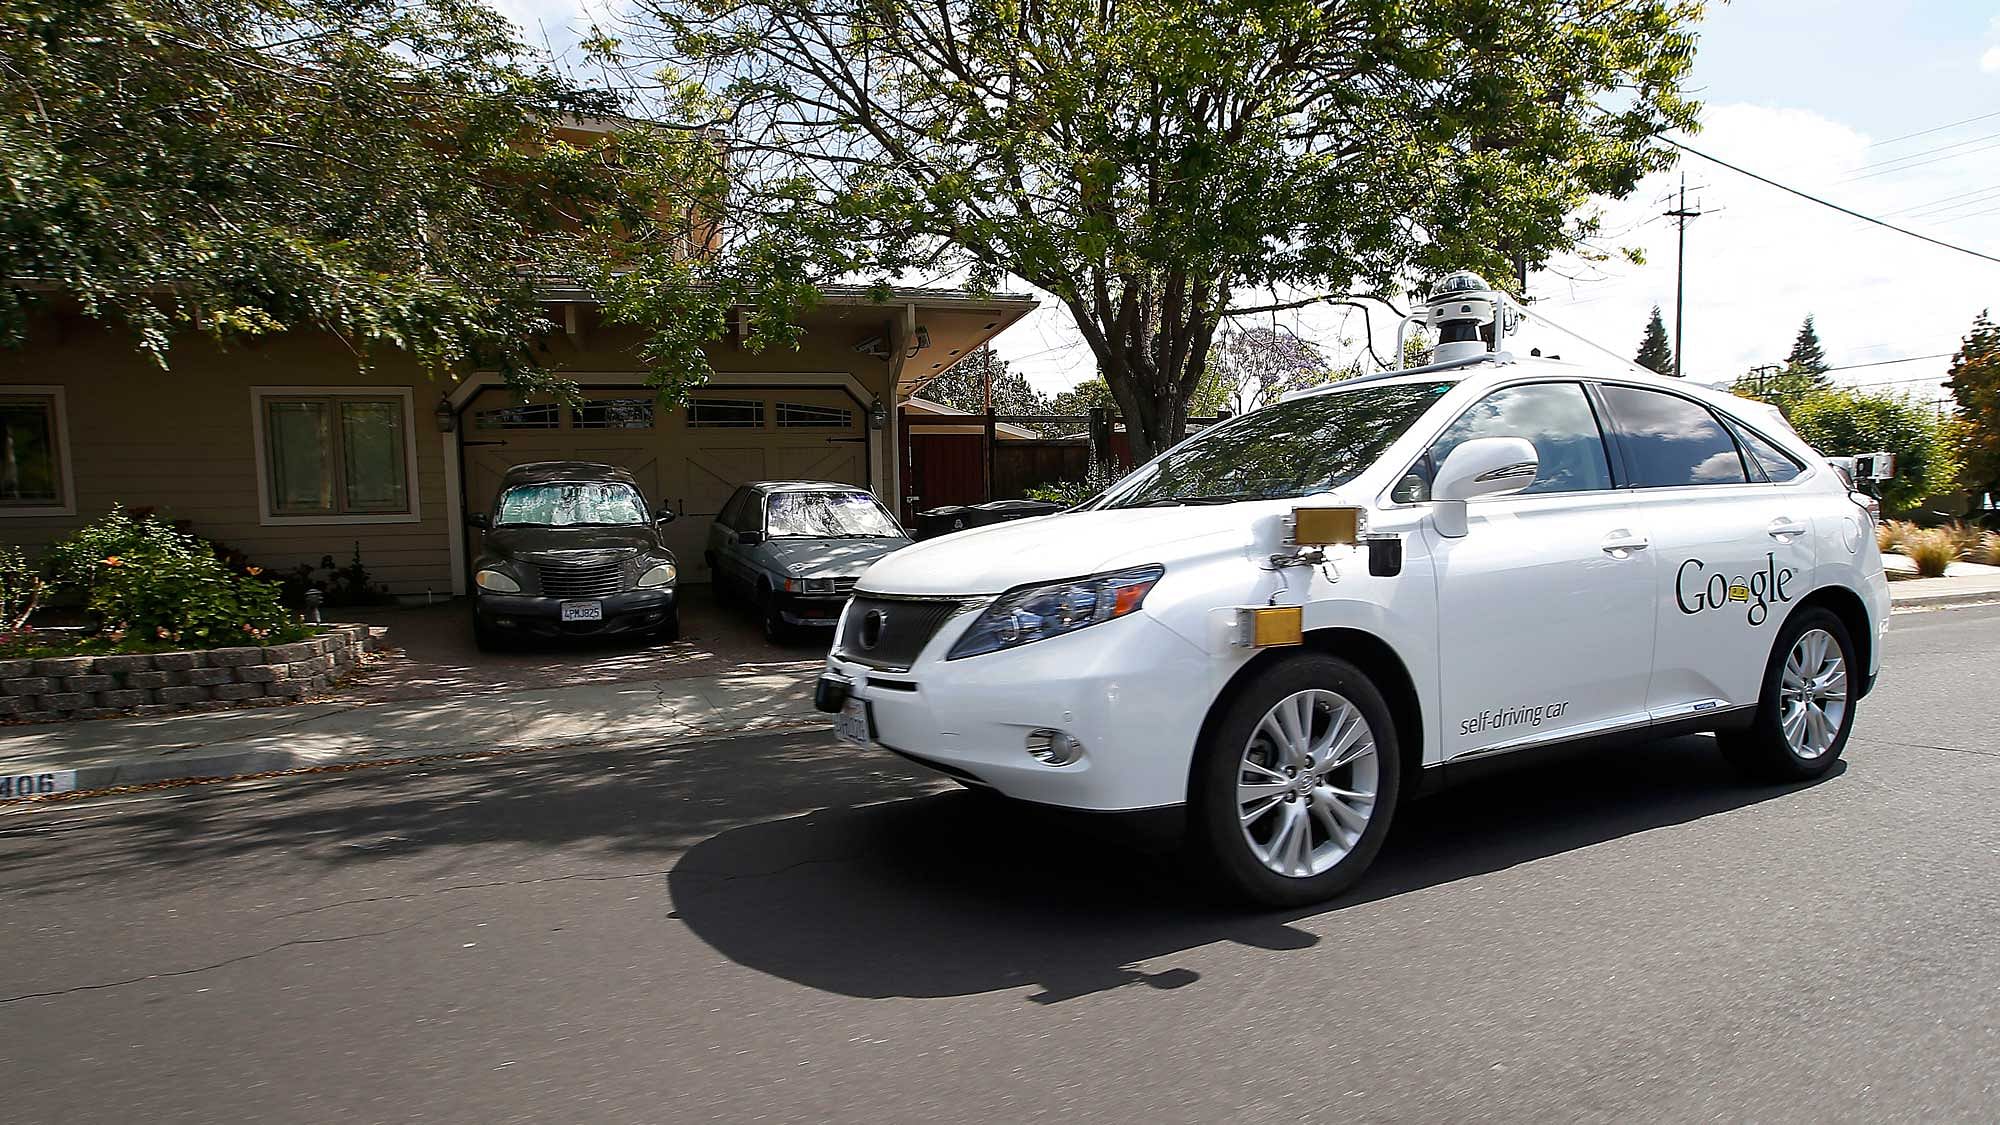 Google’s self-driving Lexus car drives along street during a demonstration at Google campus on in Mountain View, California. (Photo: AP)   